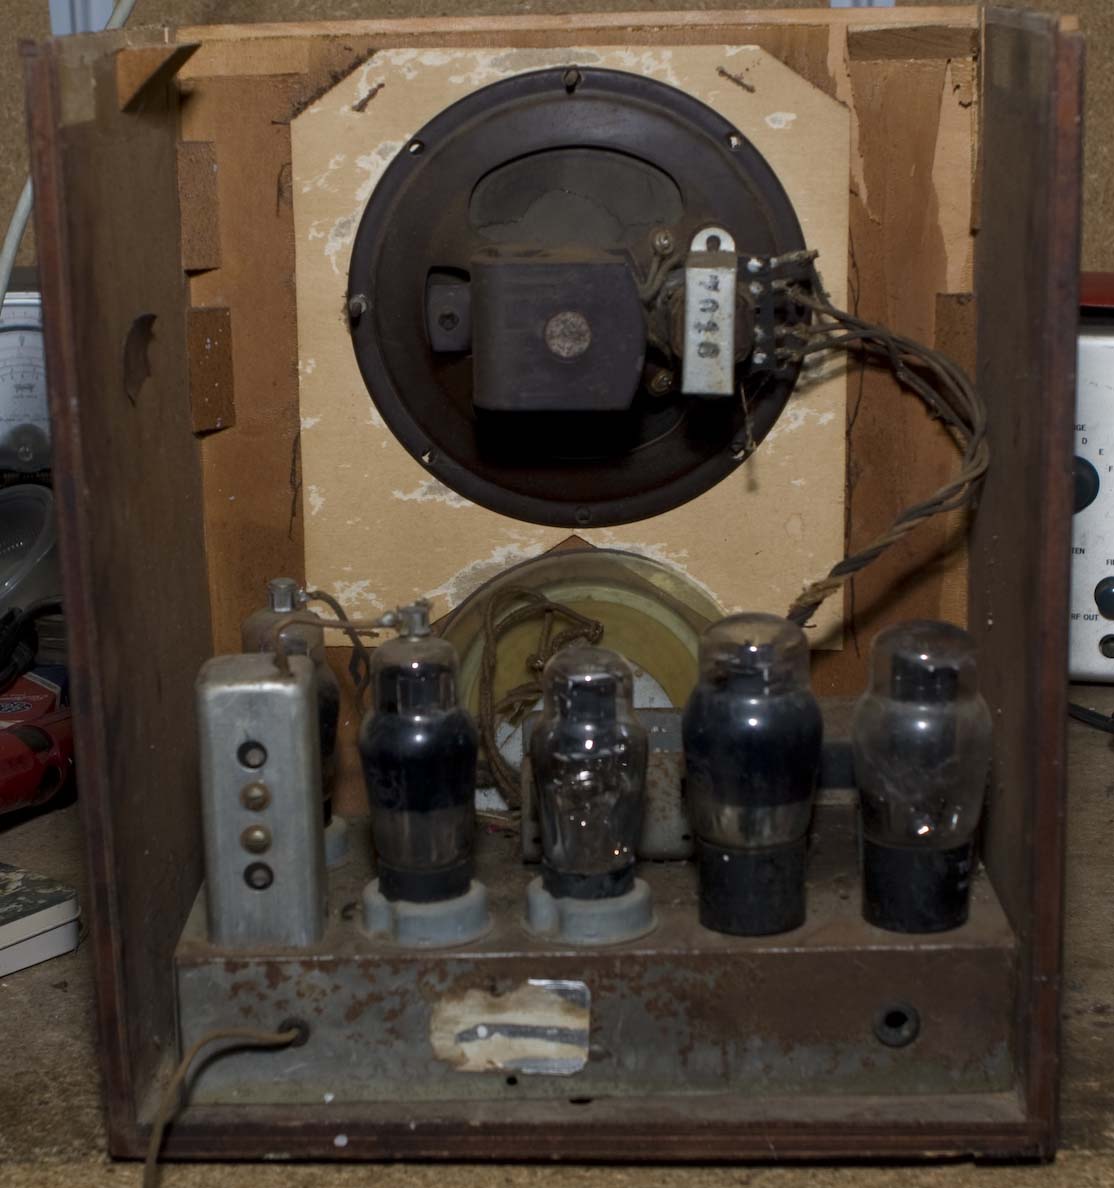 Aetna 502 tombstone radio (chassis top)